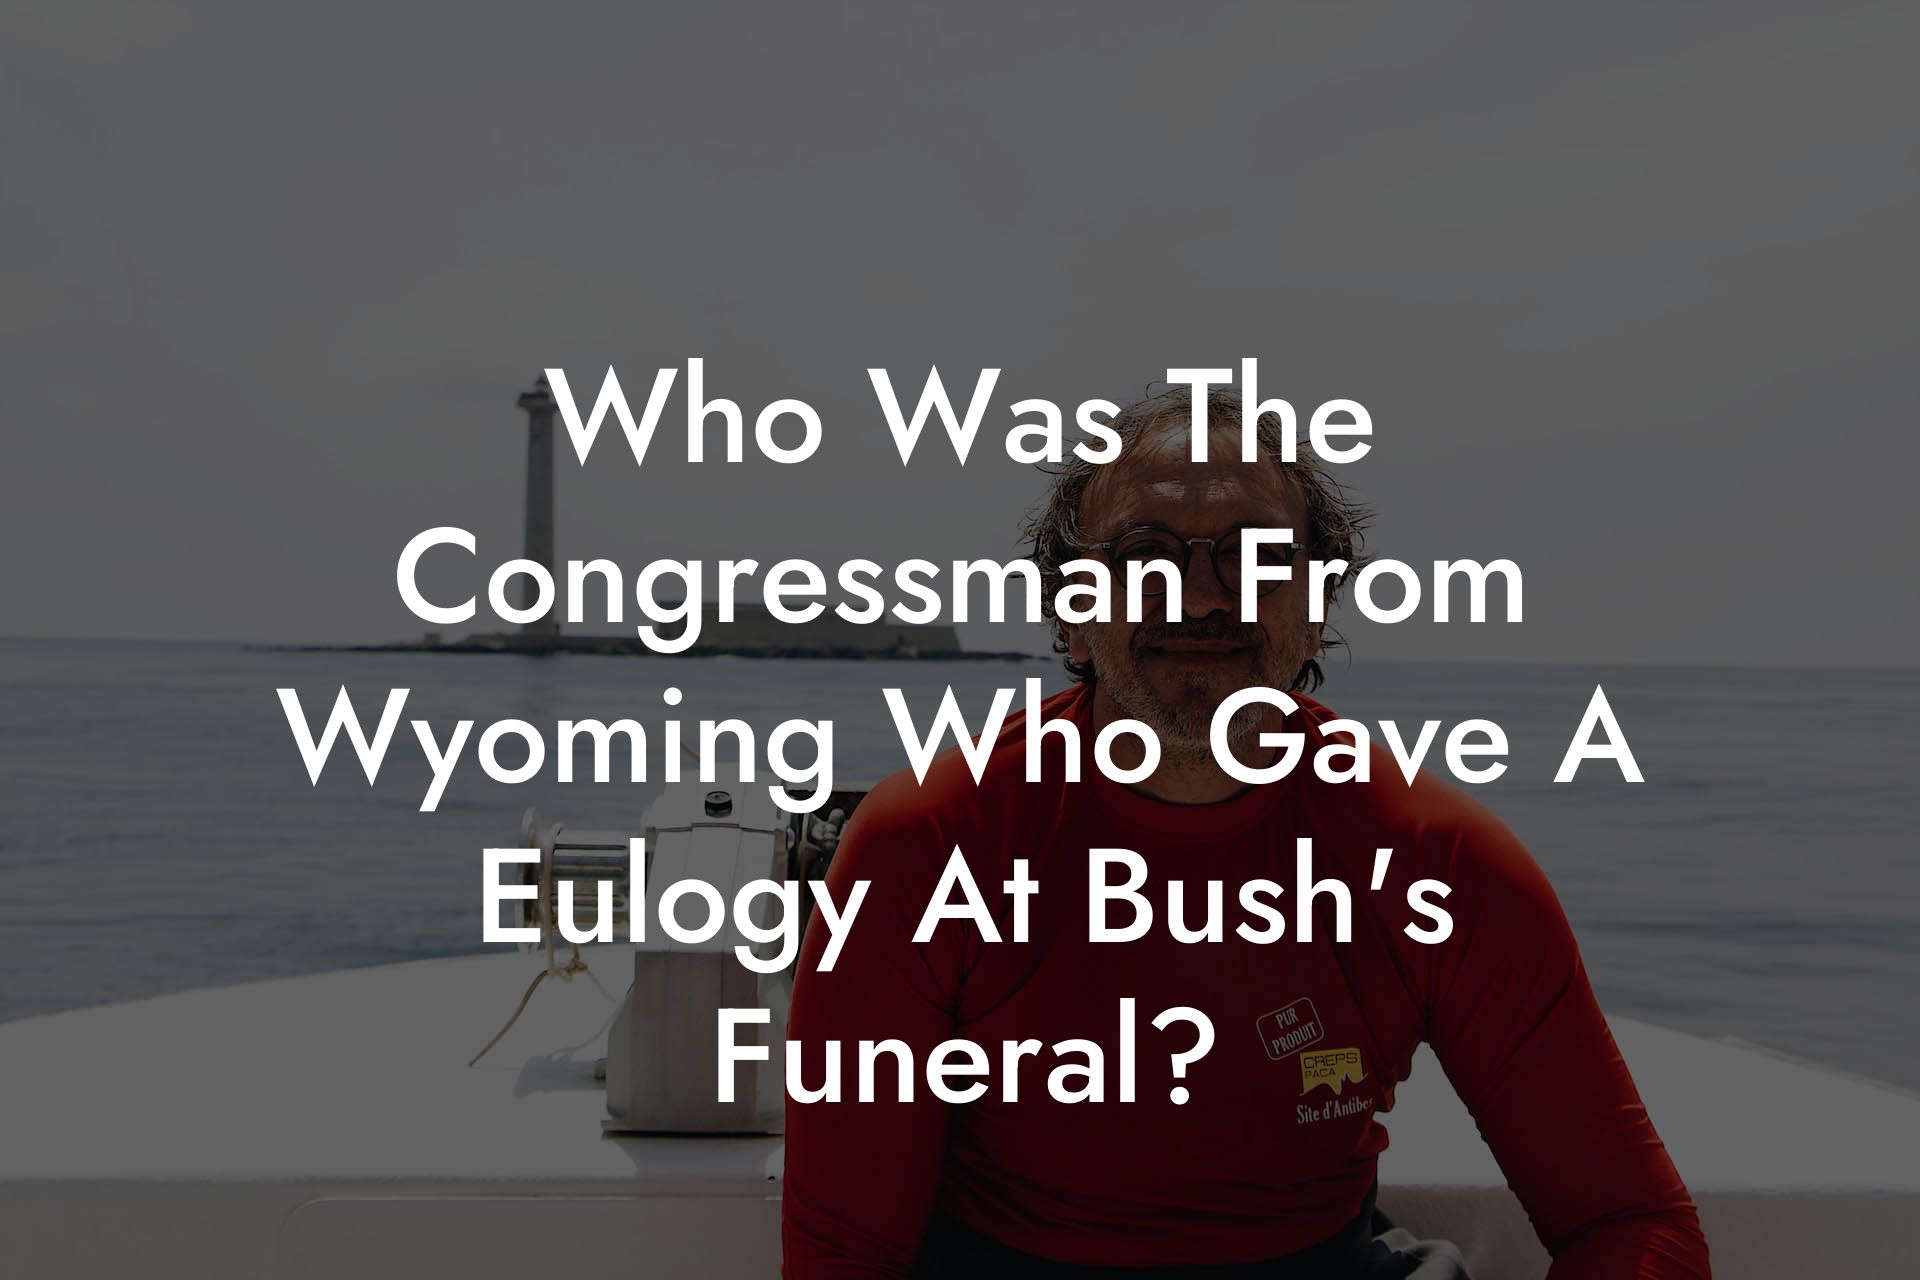 Who Was The Congressman From Wyoming Who Gave A Eulogy At Bush's Funeral?